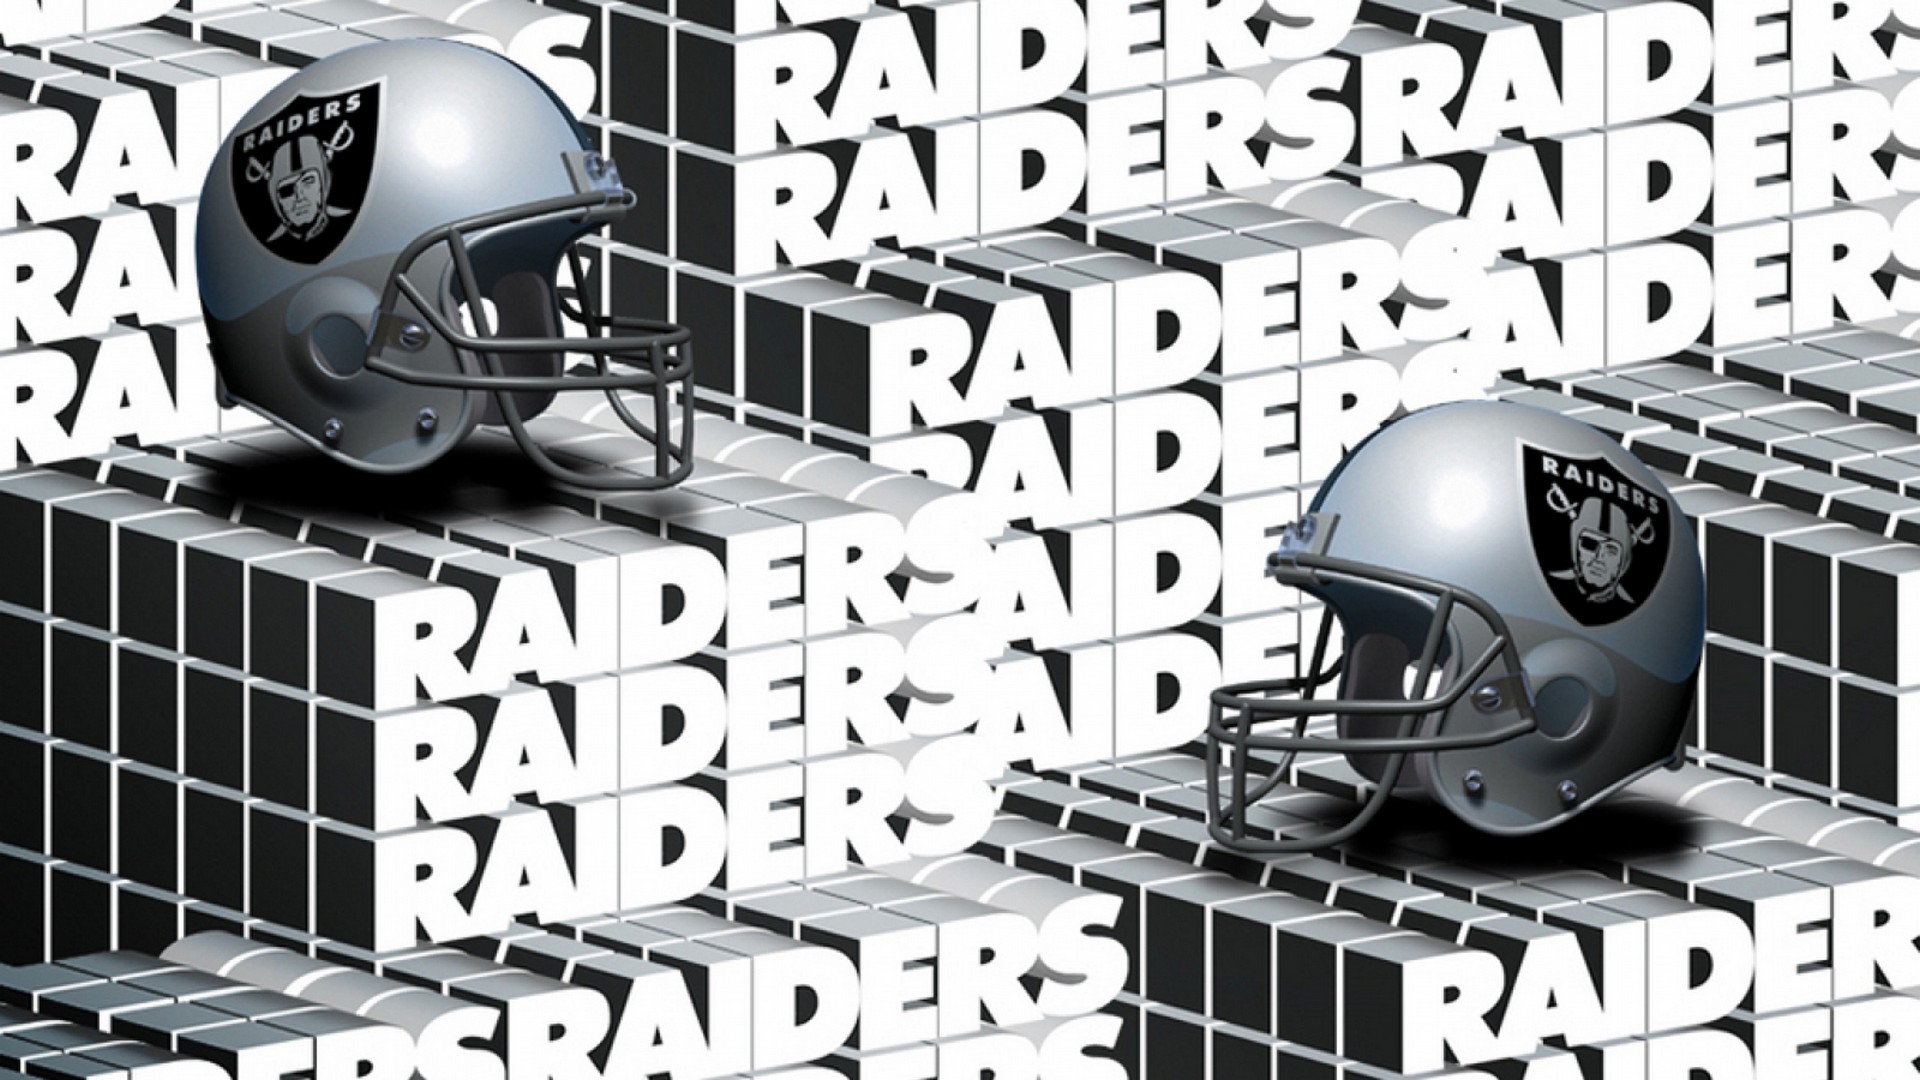 HD Backgrounds Oakland Raiders with high-resolution 1920x1080 pixel. Download and set as wallpaper for Desktop Computer, Apple iPhone X, XS Max, XR, 8, 7, 6, SE, iPad, Android